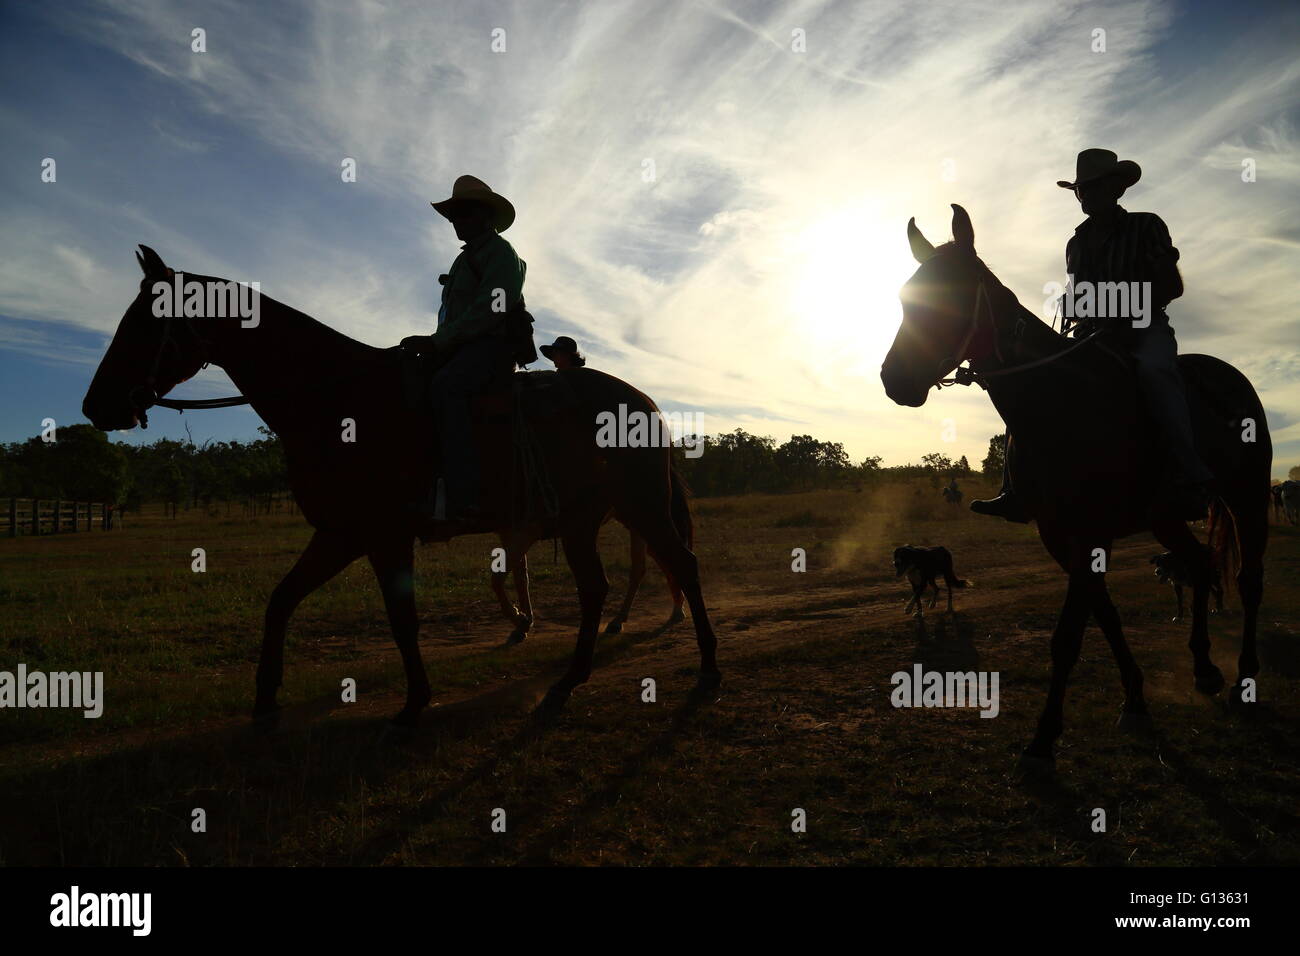 Two cowboys and a cowgirl plus hoses silhouetted against the setting sun in Eidsvold, Queensland, Australia. Stock Photo